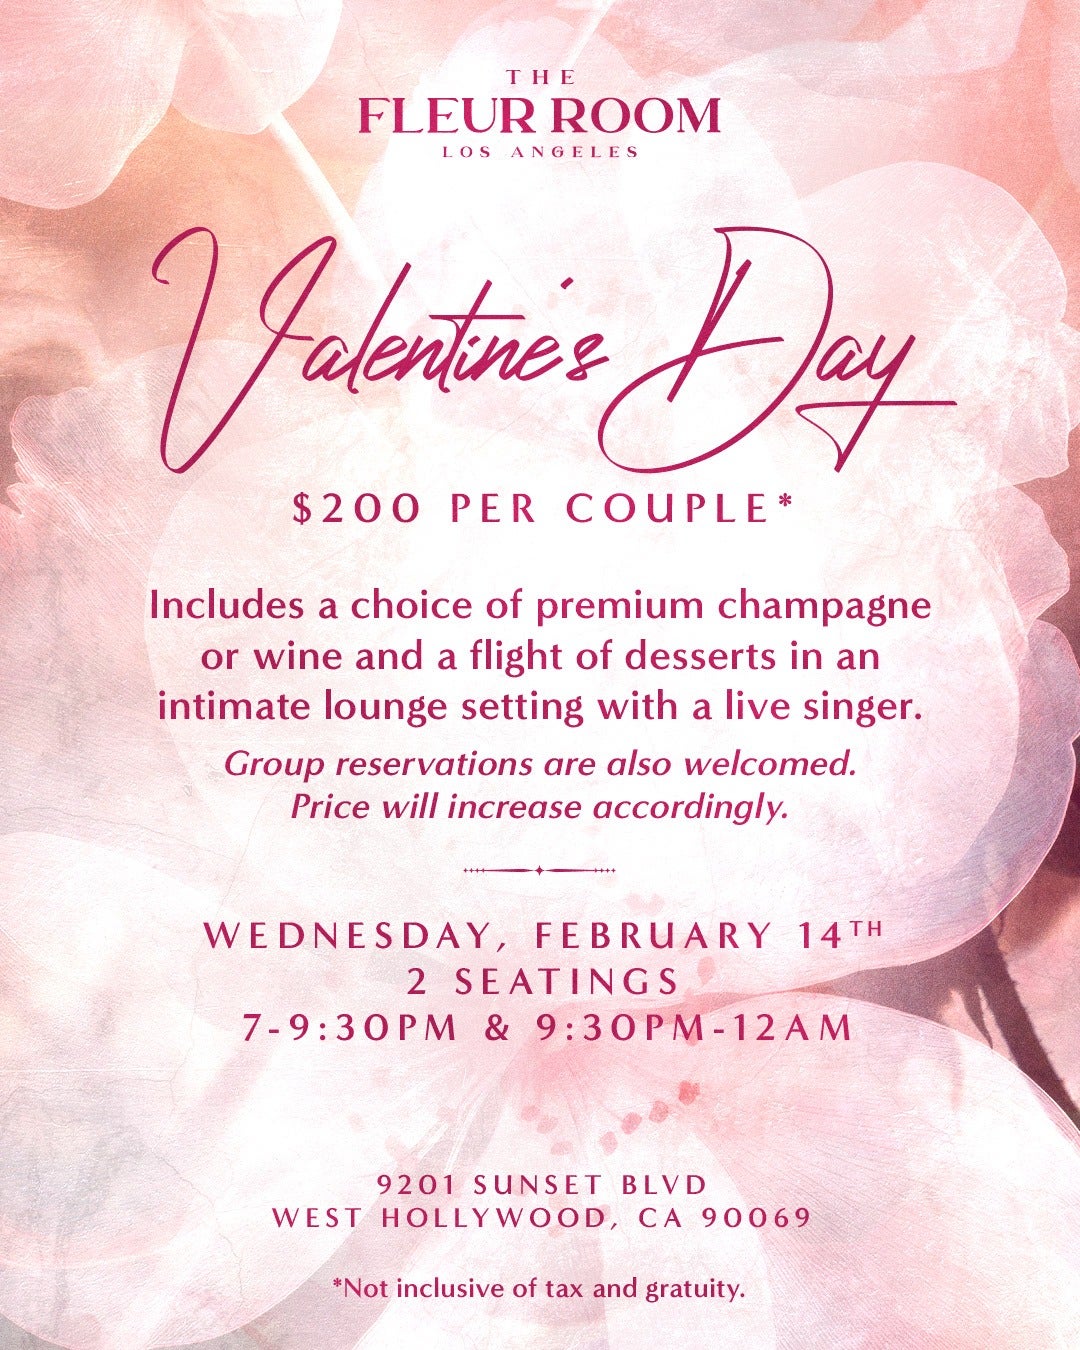 The Fleur Room Valentine's Day